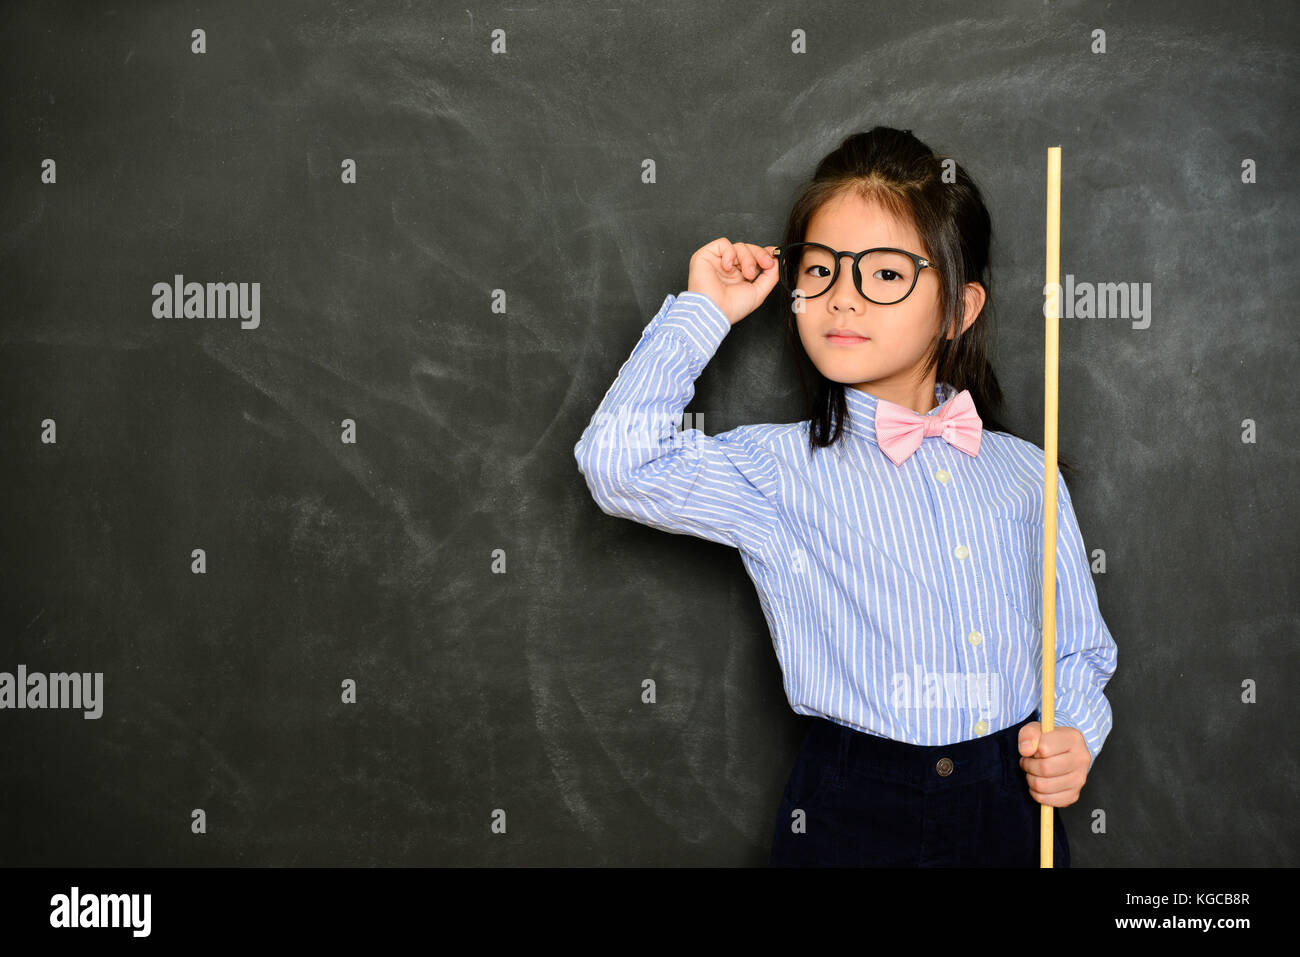 young pretty female tutor using stick teaching study class and standing in chalk blackboard background. school education concept. Stock Photo